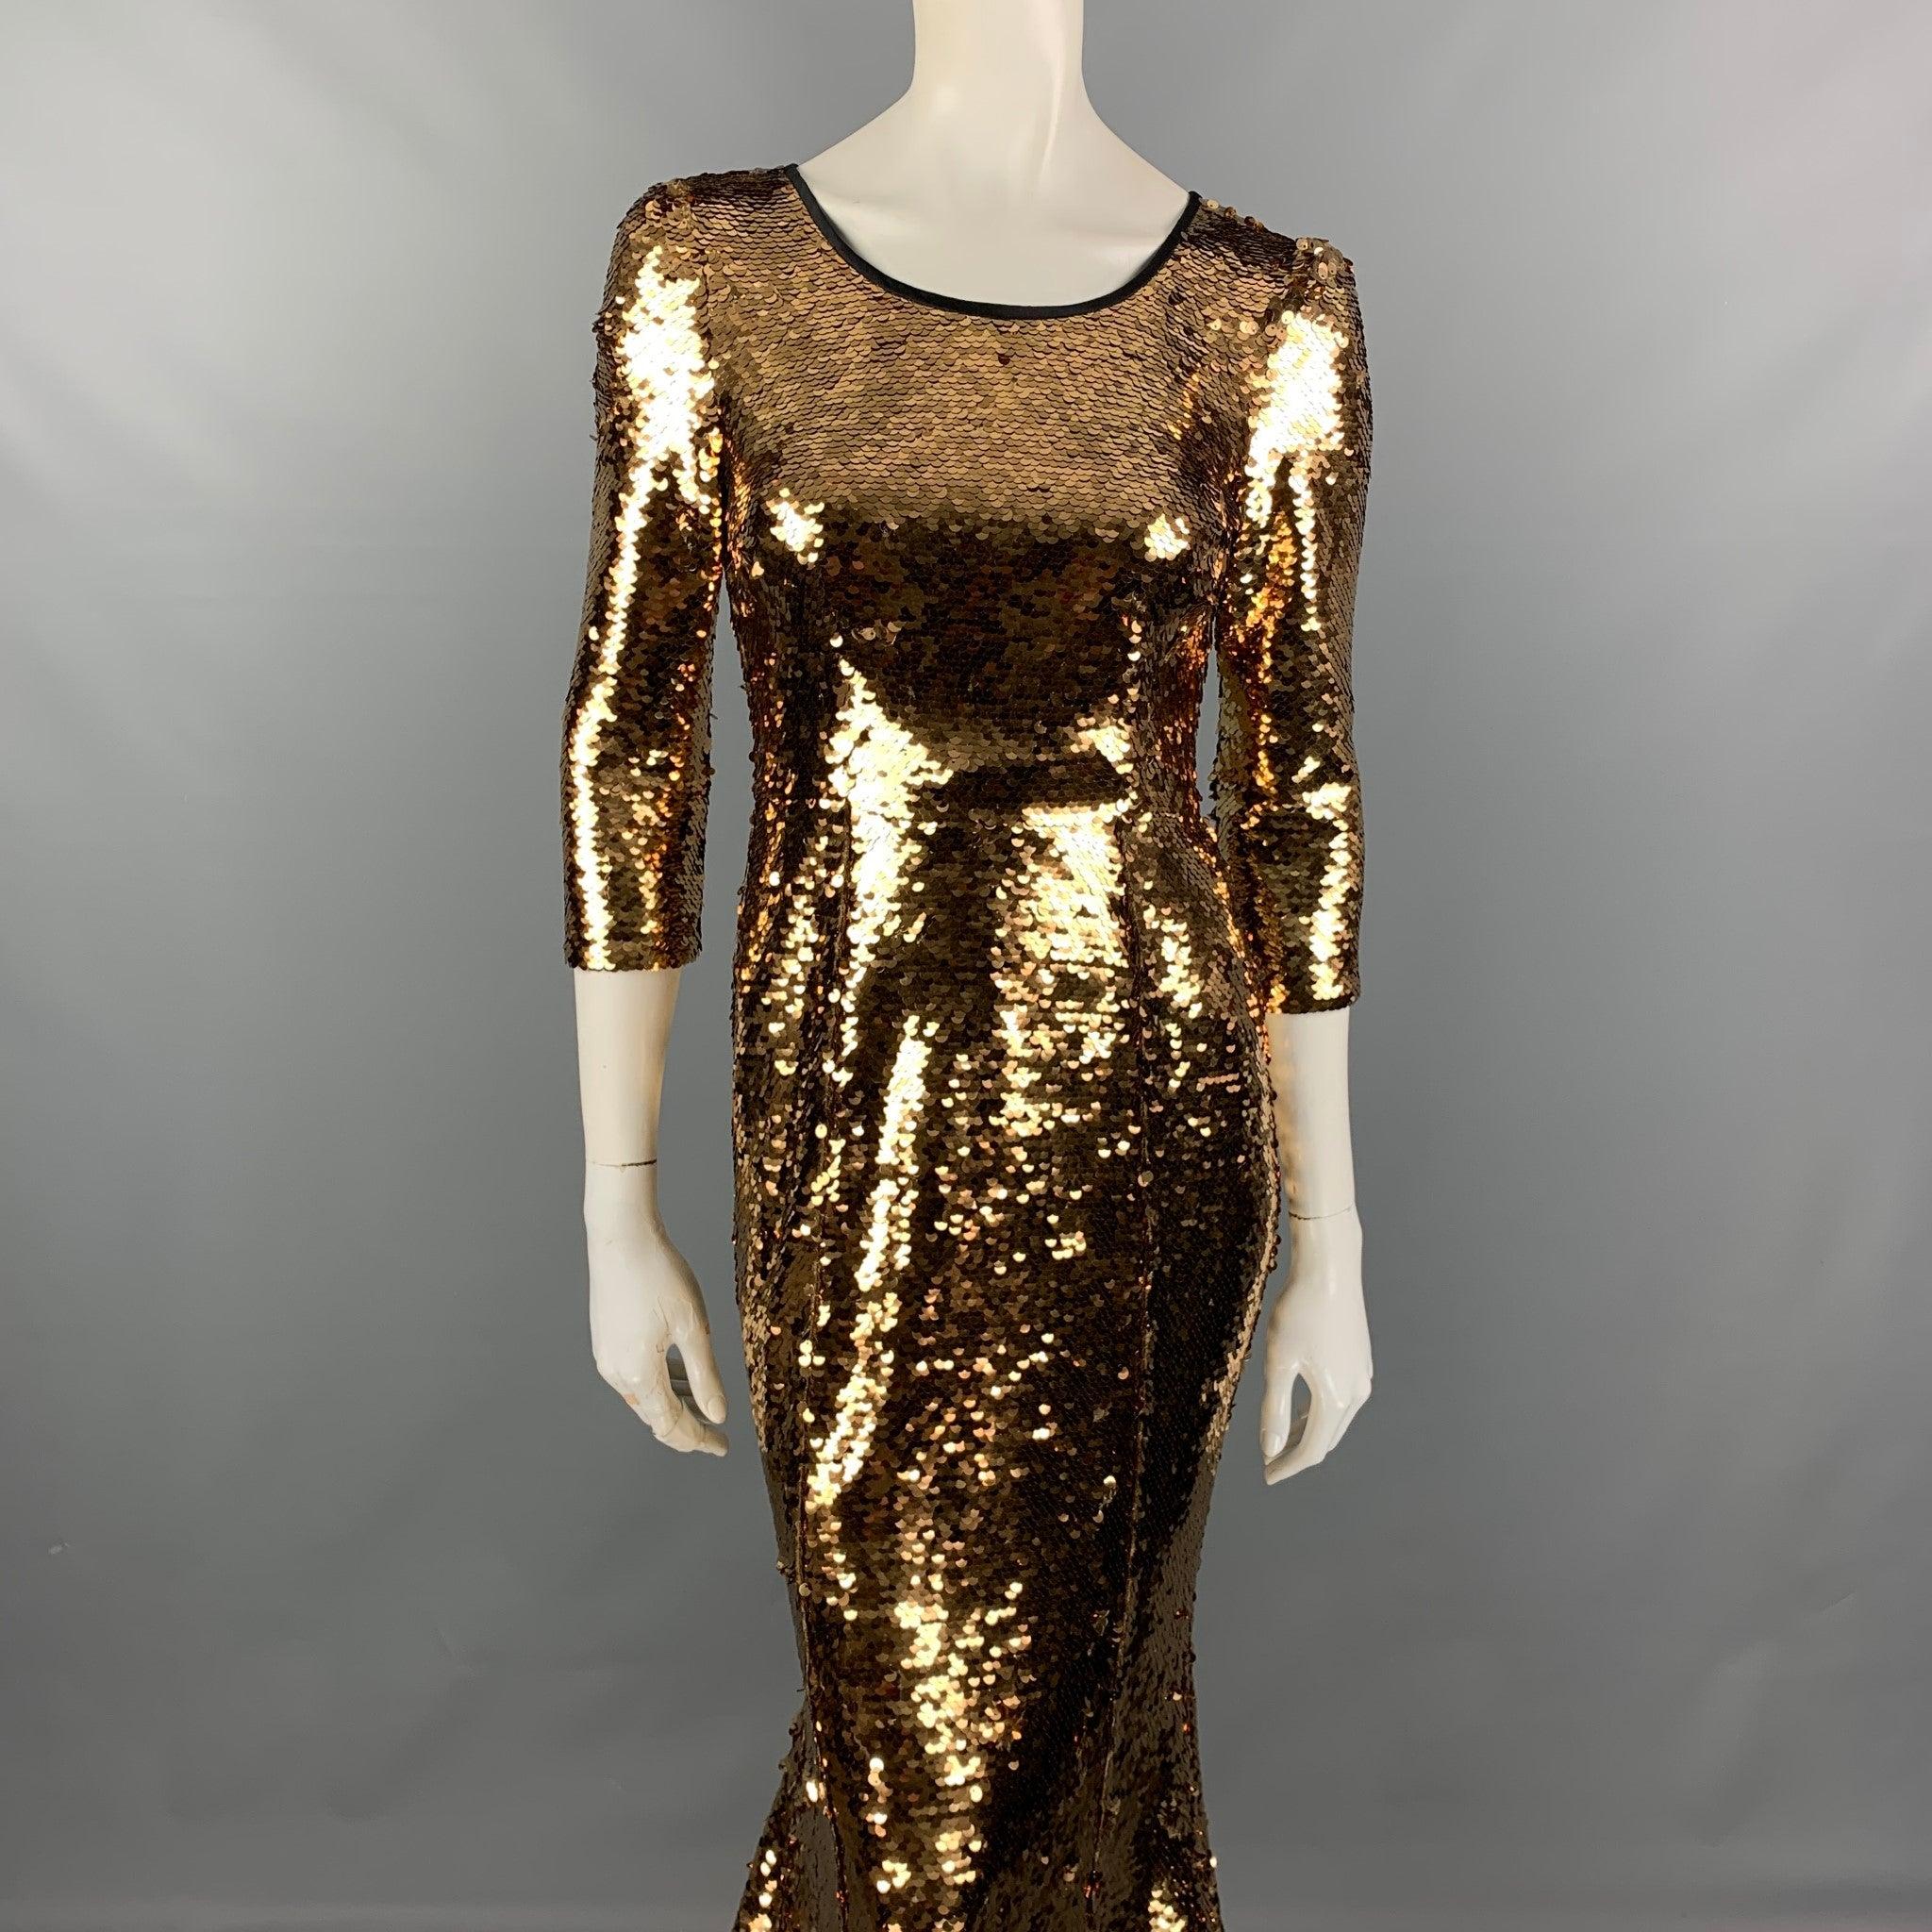 DOLCE & GABBANA gown comes in a gold & black sequined polyester featuring a mermaid train style, flared, gathered hem, 3/4 sleeves, and a invisible zip closure. Made in Italy. Very Good
Pre-Owned Condition. 

Marked:  42 

Measurements: 
 
Shoulder: